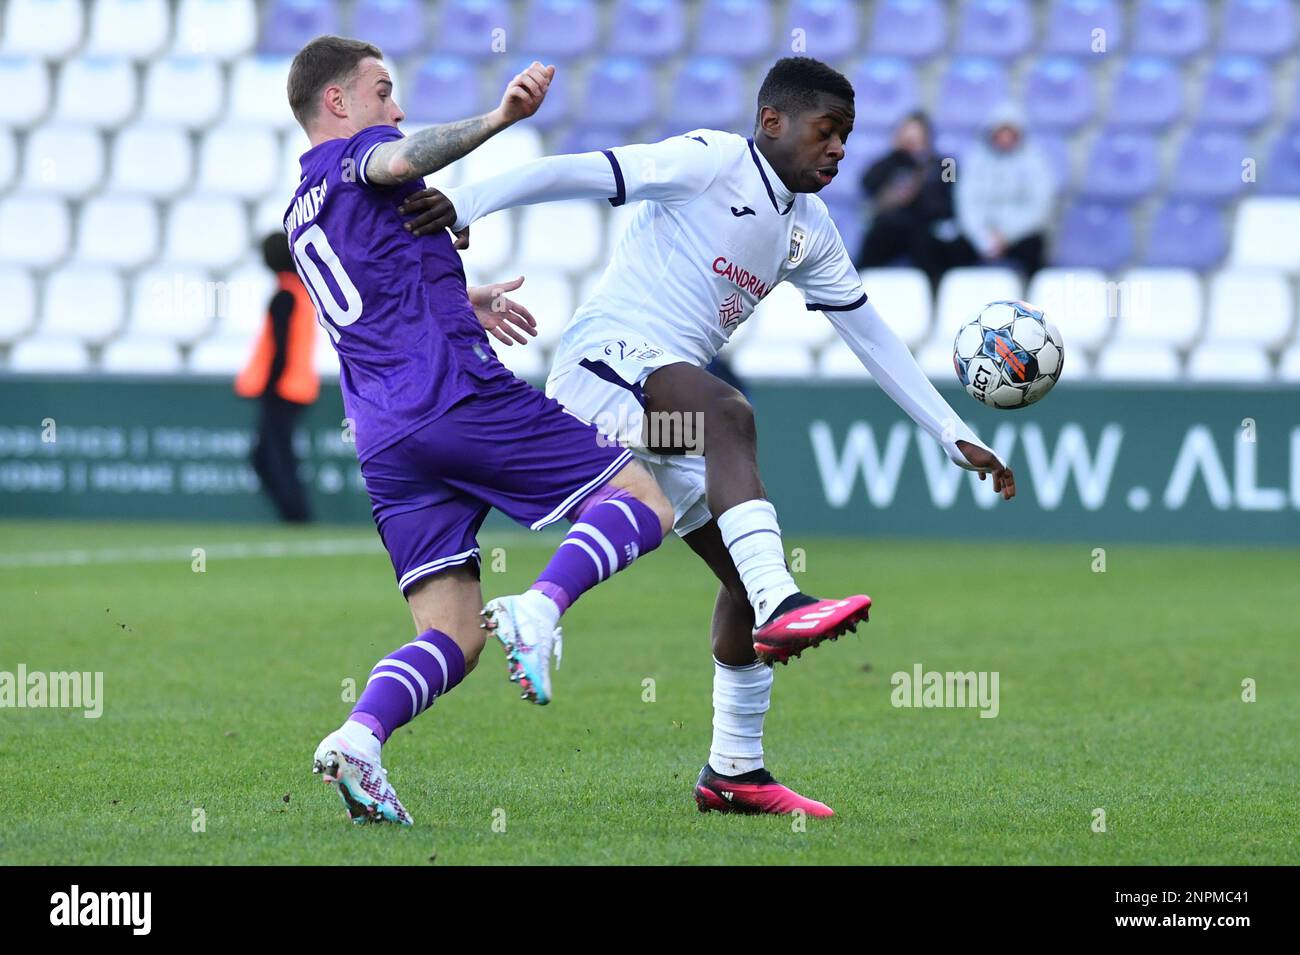 RSCA Futures' Lucas Lissens pictured in action during a soccer match  between Beerschot VA and RWD Molenbeek, Sunday 26 February 2023 in Antwerp,  on day 1 of Relegation Play-offs during the 2022-2023 